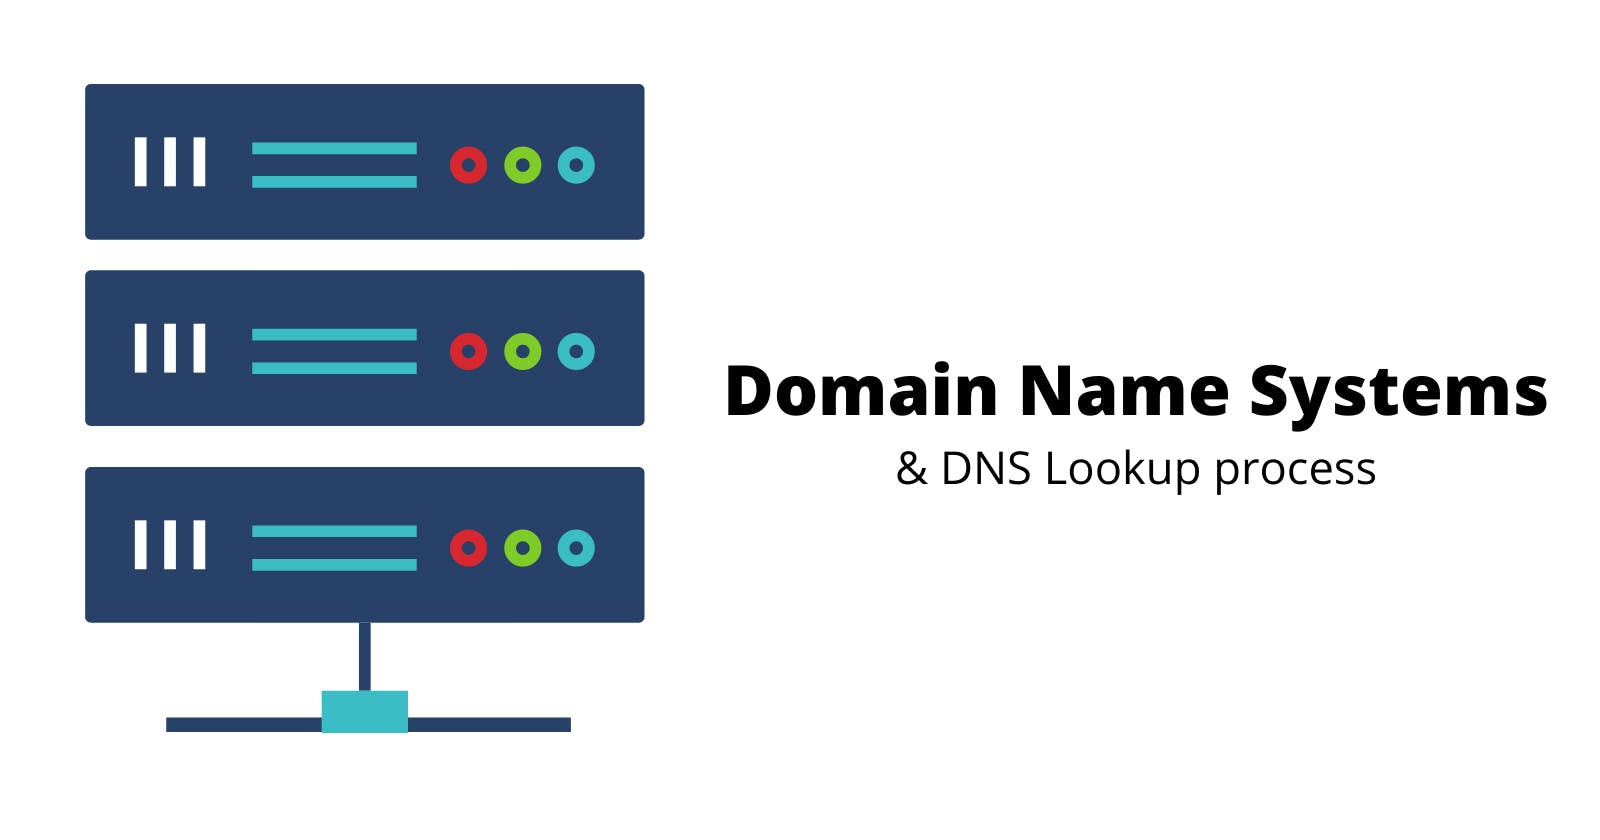 Domain Name Systems (DNS)